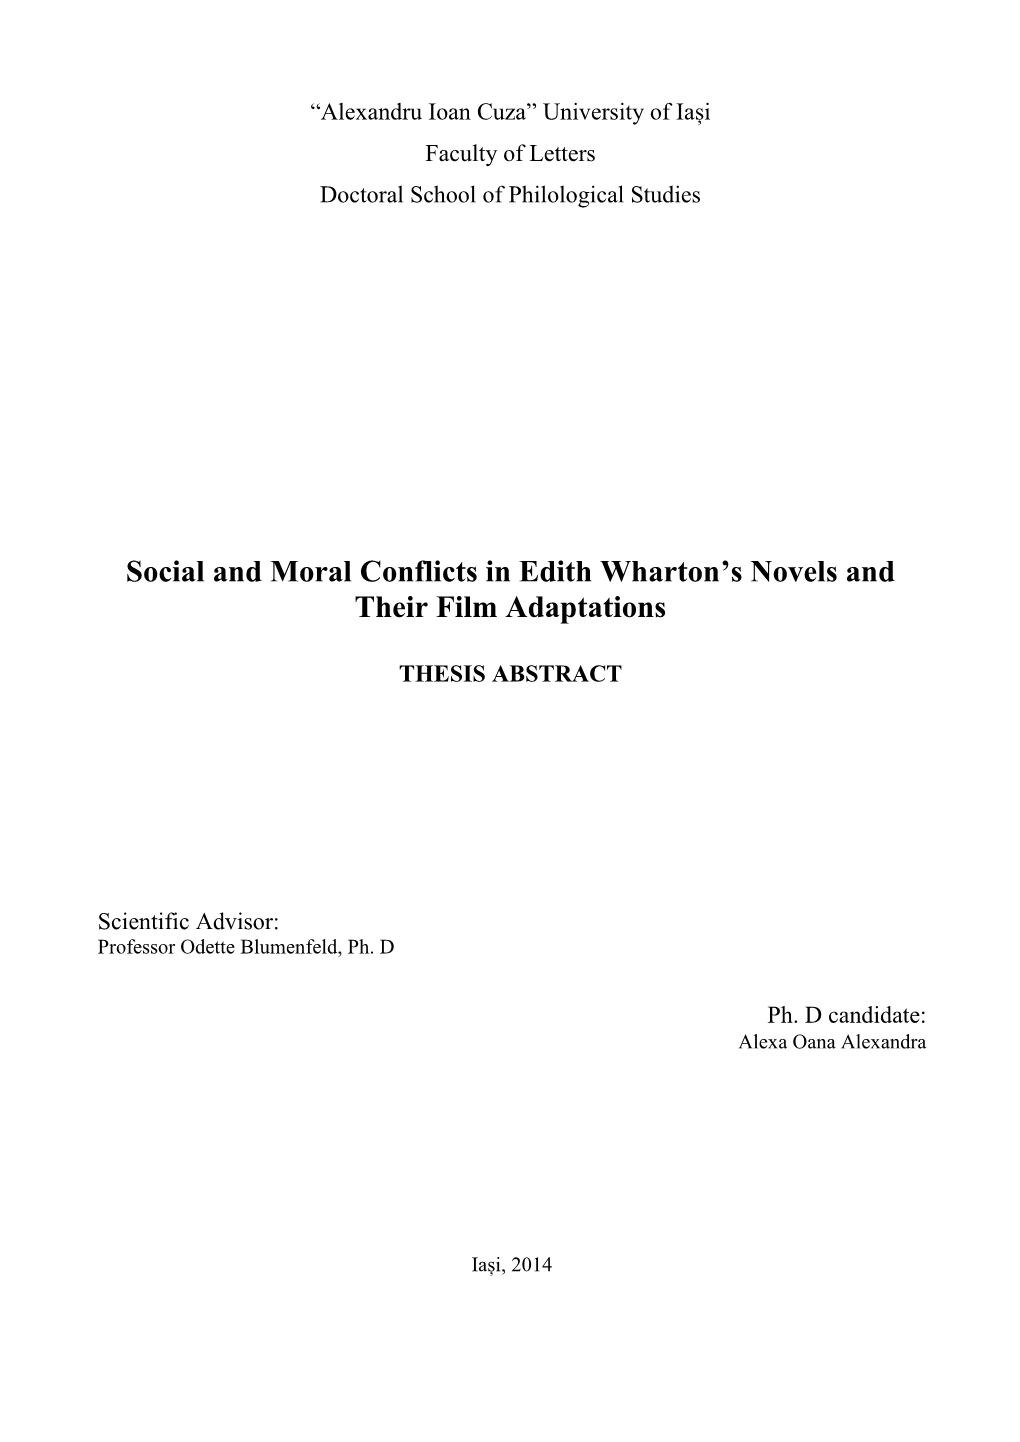 Social and Moral Conflicts in Edith Wharton's Novels and Their Film